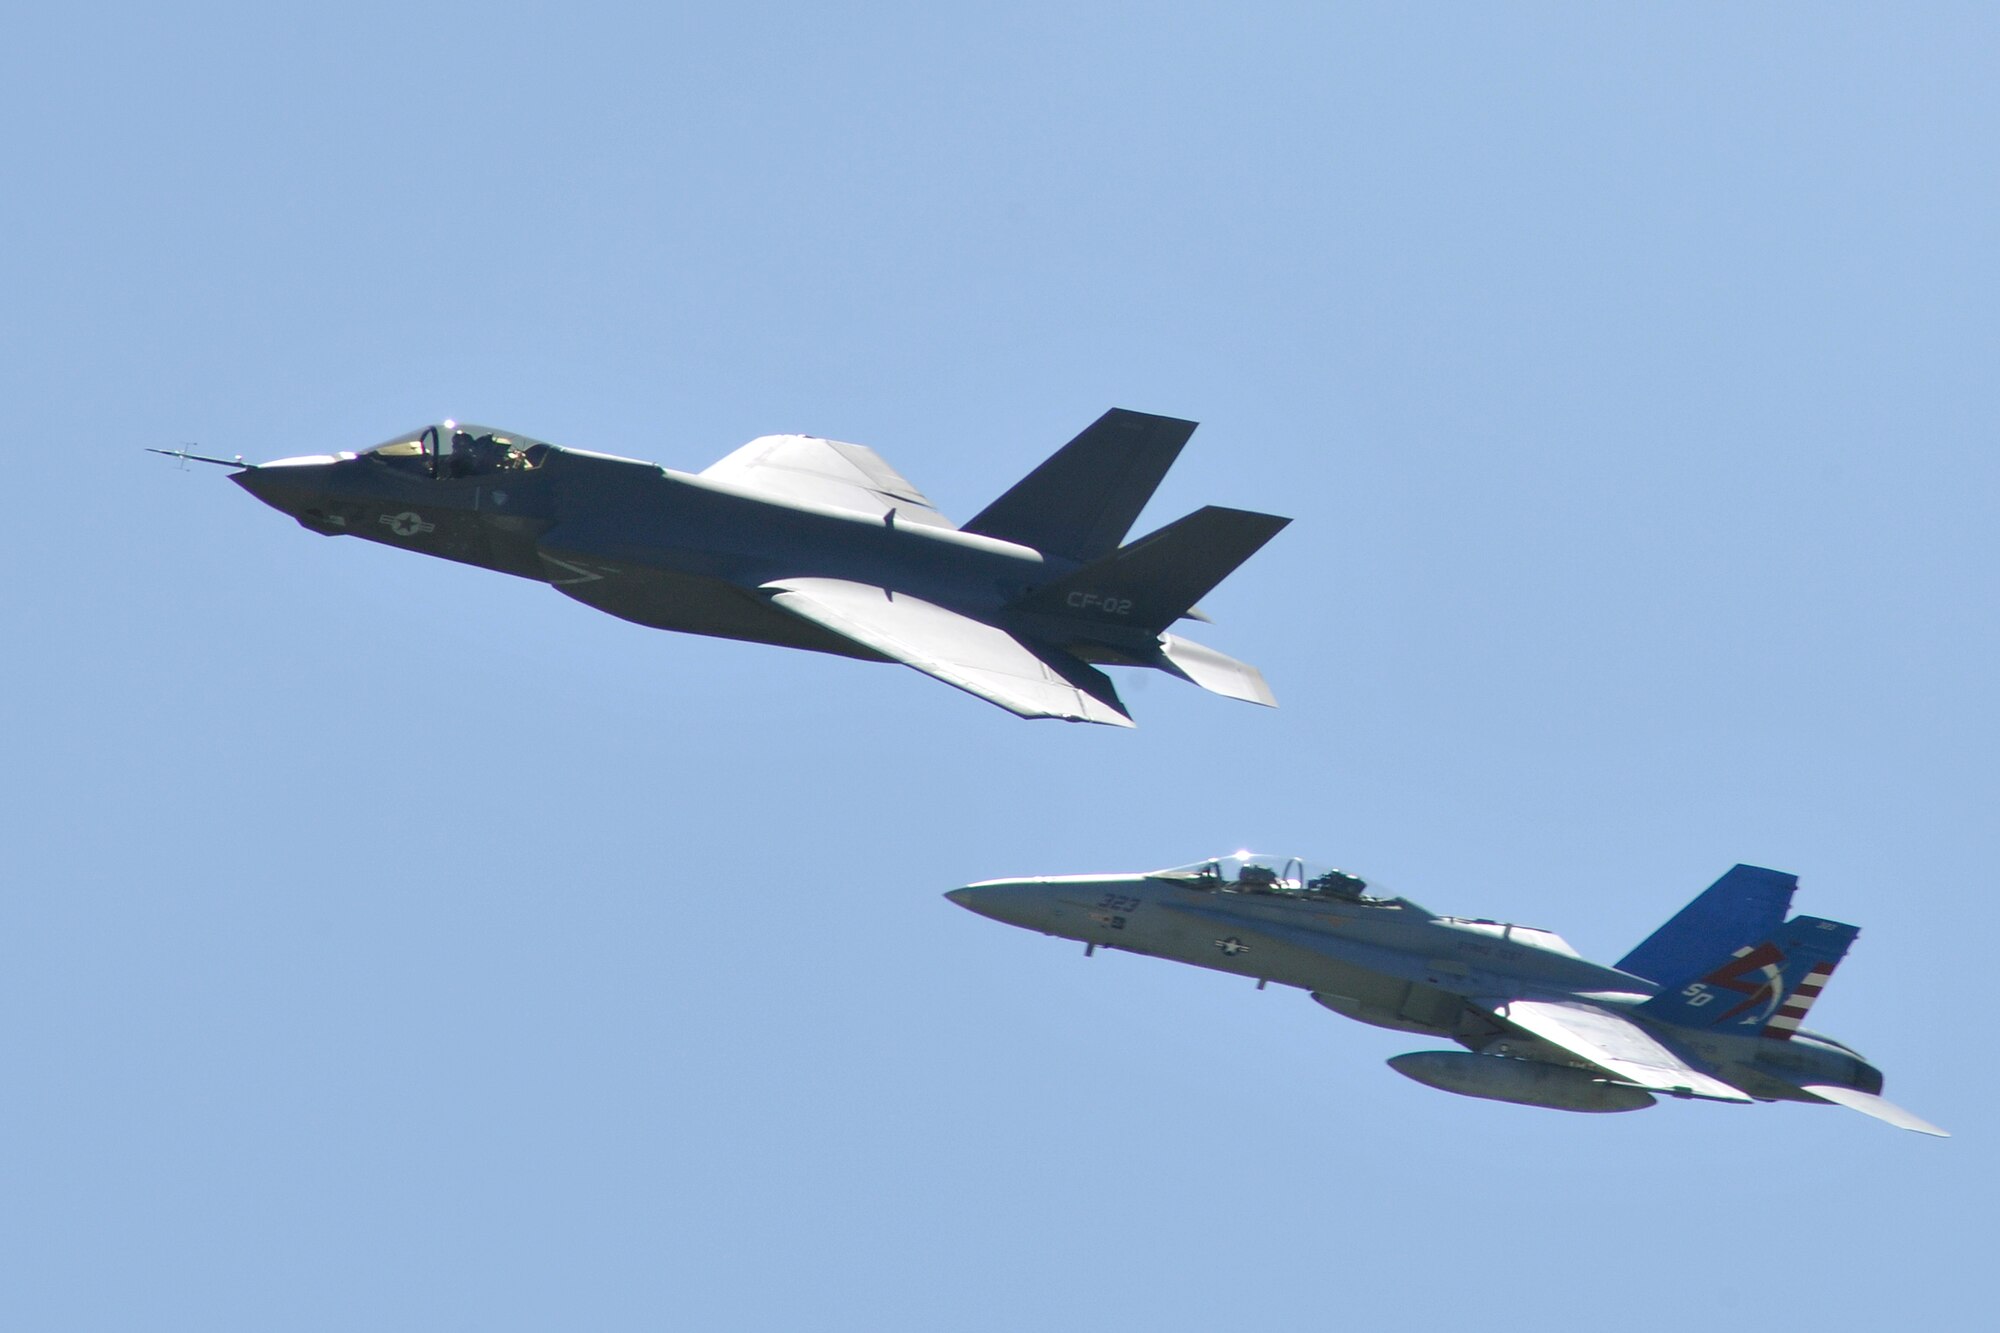 A Navy F-18 Hornet escorts the new Navy variant of the F-35 Lightning II as they fly over the crowd during the 2011 Joint Service Open House at Joint Base Andrews, Md., May 21. This is the first time this aircraft has performed at a public event of this nature. The JSOH affords the public an opportunity to meet the men and women of the Armed Forces and to see military equipment through the efforts of active duty, guard and reserve servicemembers, as well as civilians employees, retirees and family members. (U.S Air Force photo by Senior Airman Melissa V. Brownstein)